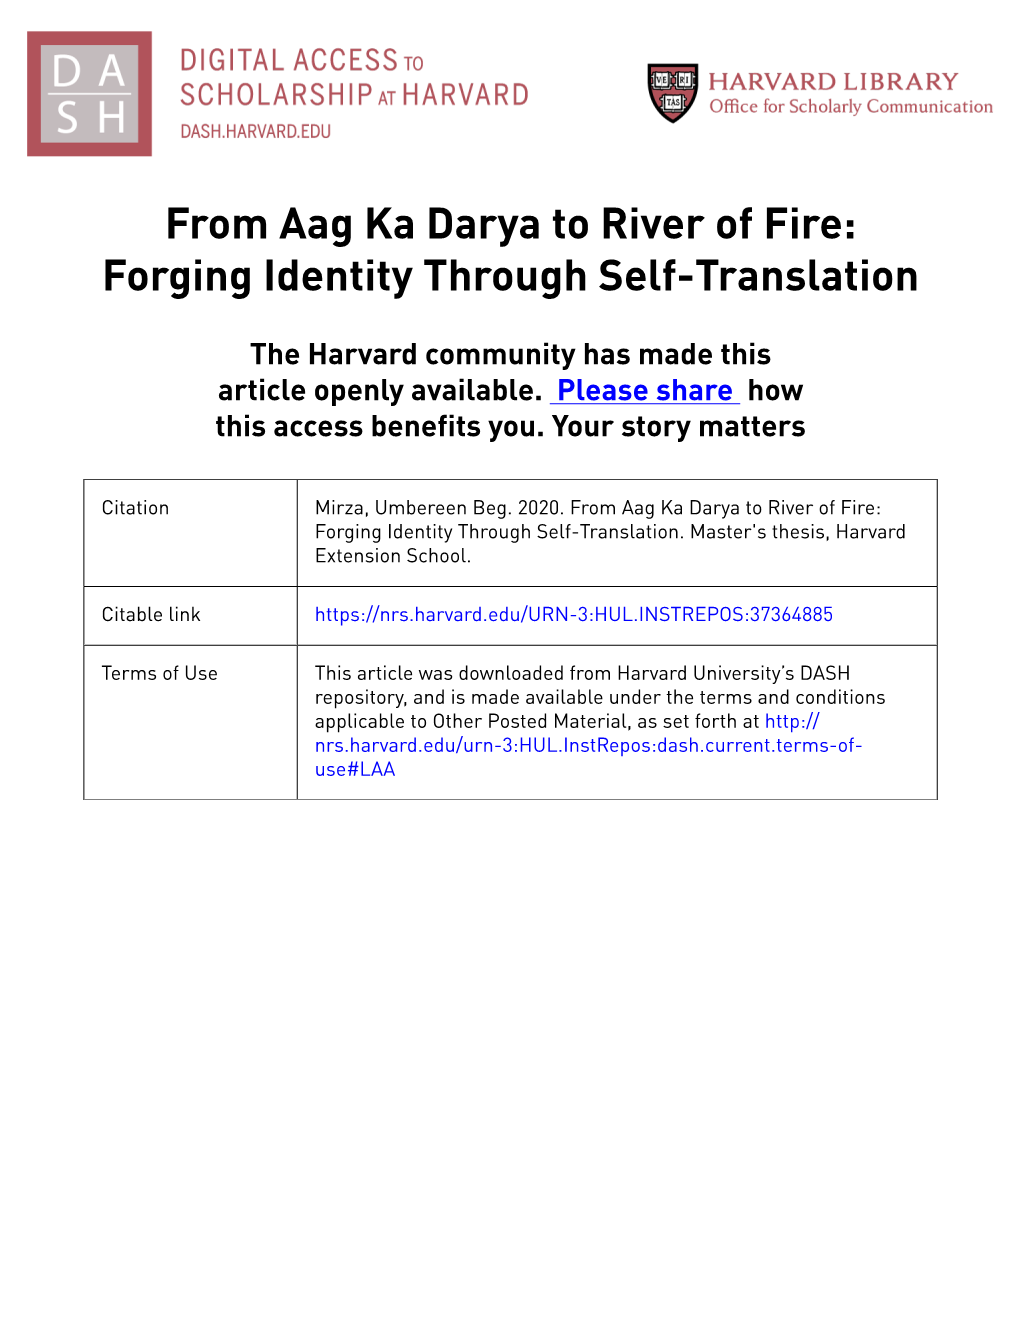 From Aag Ka Darya to River of Fire: Forging Identity Through Self-Translation